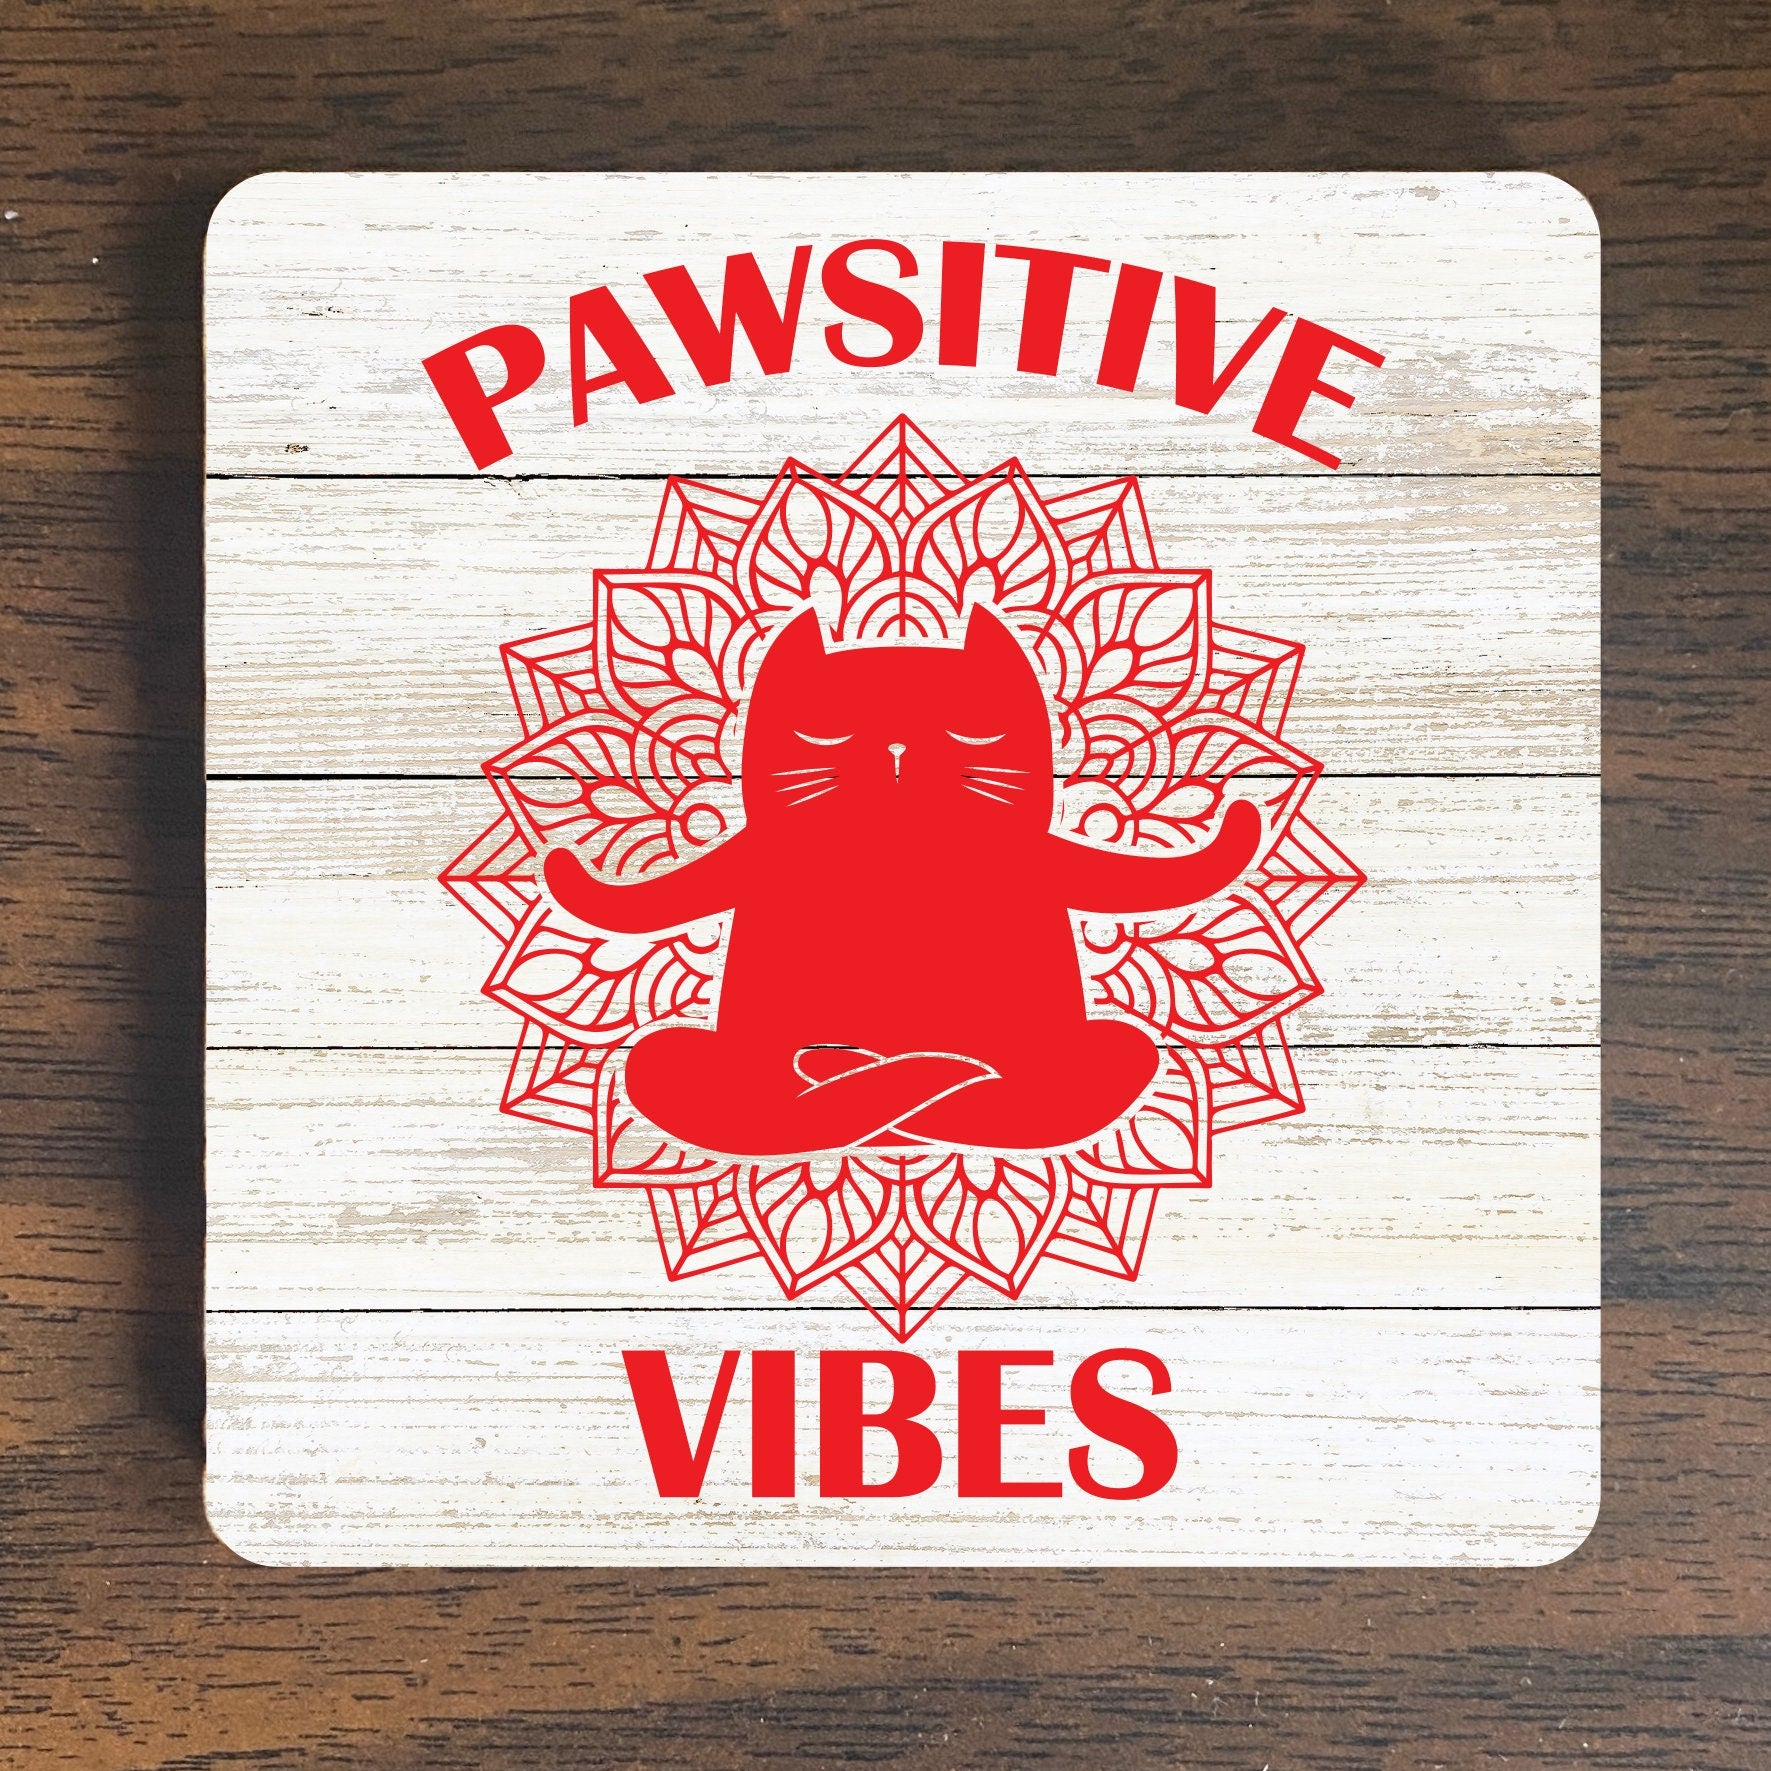 Pawsitive Vibes Magnet 